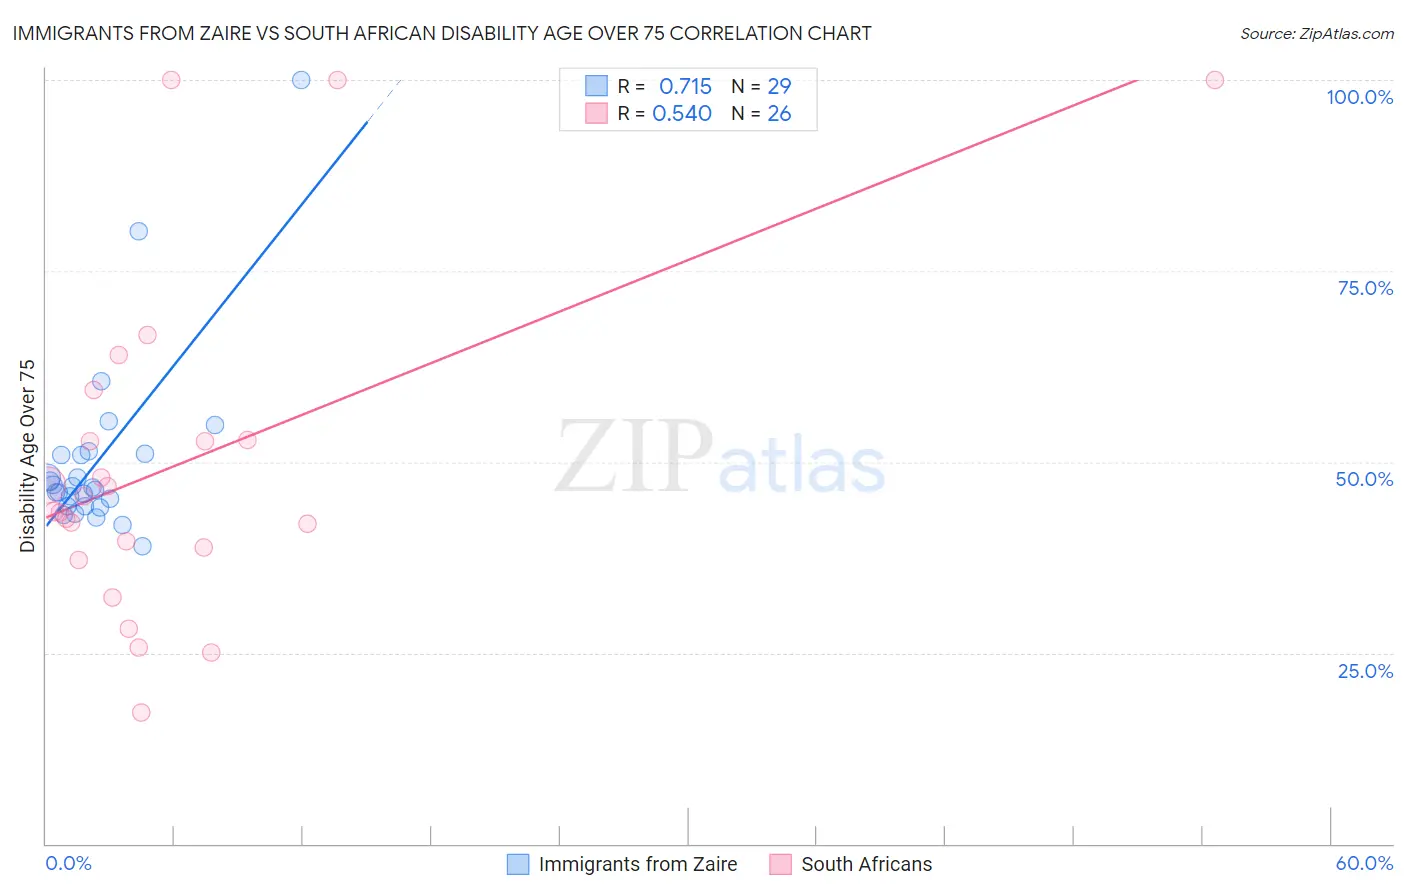 Immigrants from Zaire vs South African Disability Age Over 75